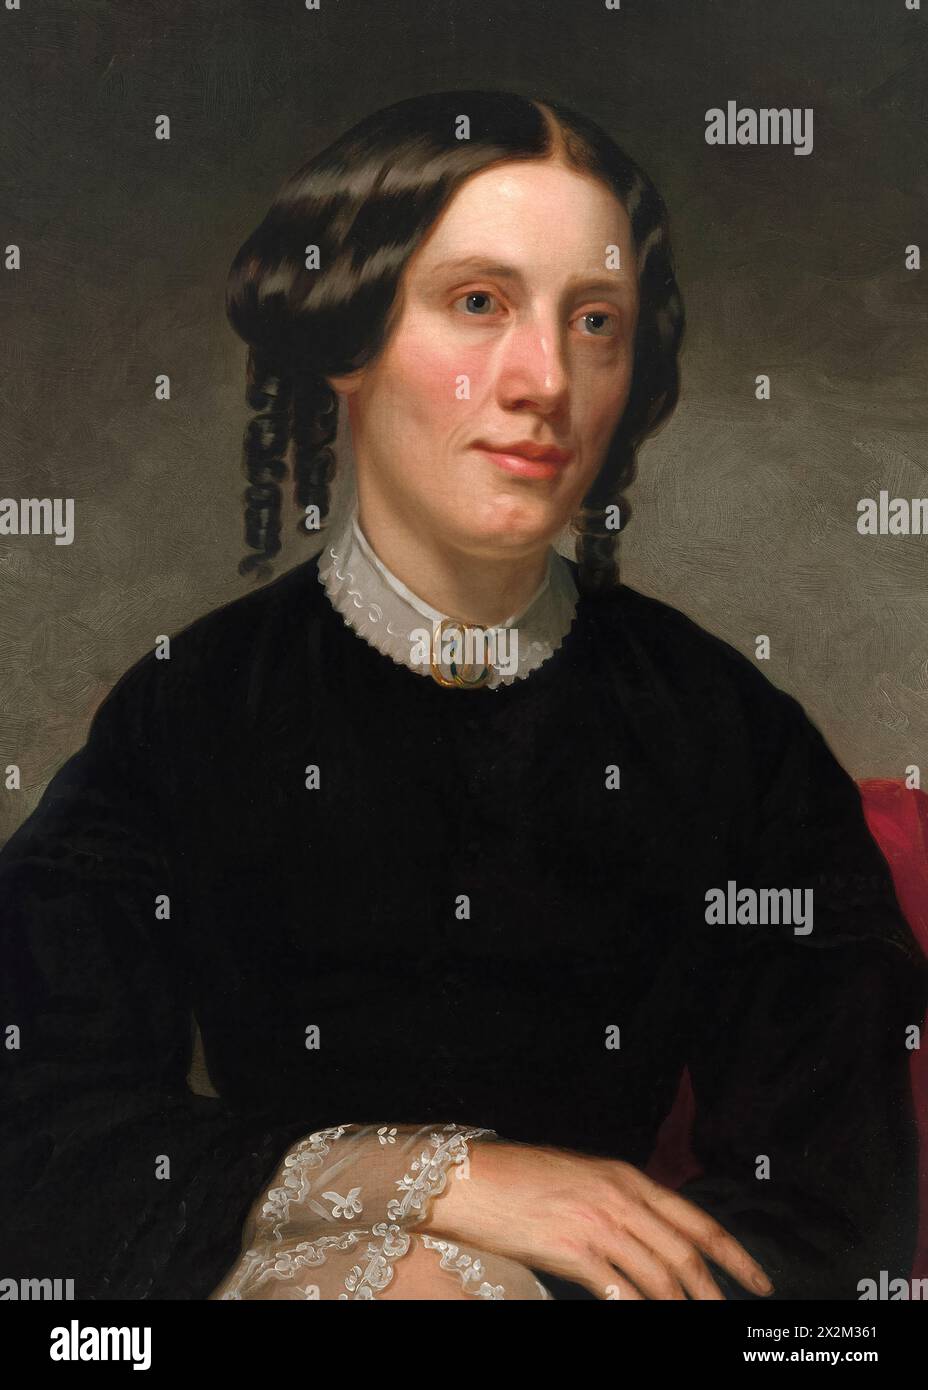 Portrait of Harriet Beecher Stowe (Cropped) by American artist Alanson Fisher (1807-1884) painted in 1853. This portrait was commissioned a year after the publication of Stowe’s bestselling novel 'Uncle Tom's Cabin’ that did much to progress the abolitionist cause in 1850s. Stock Photo